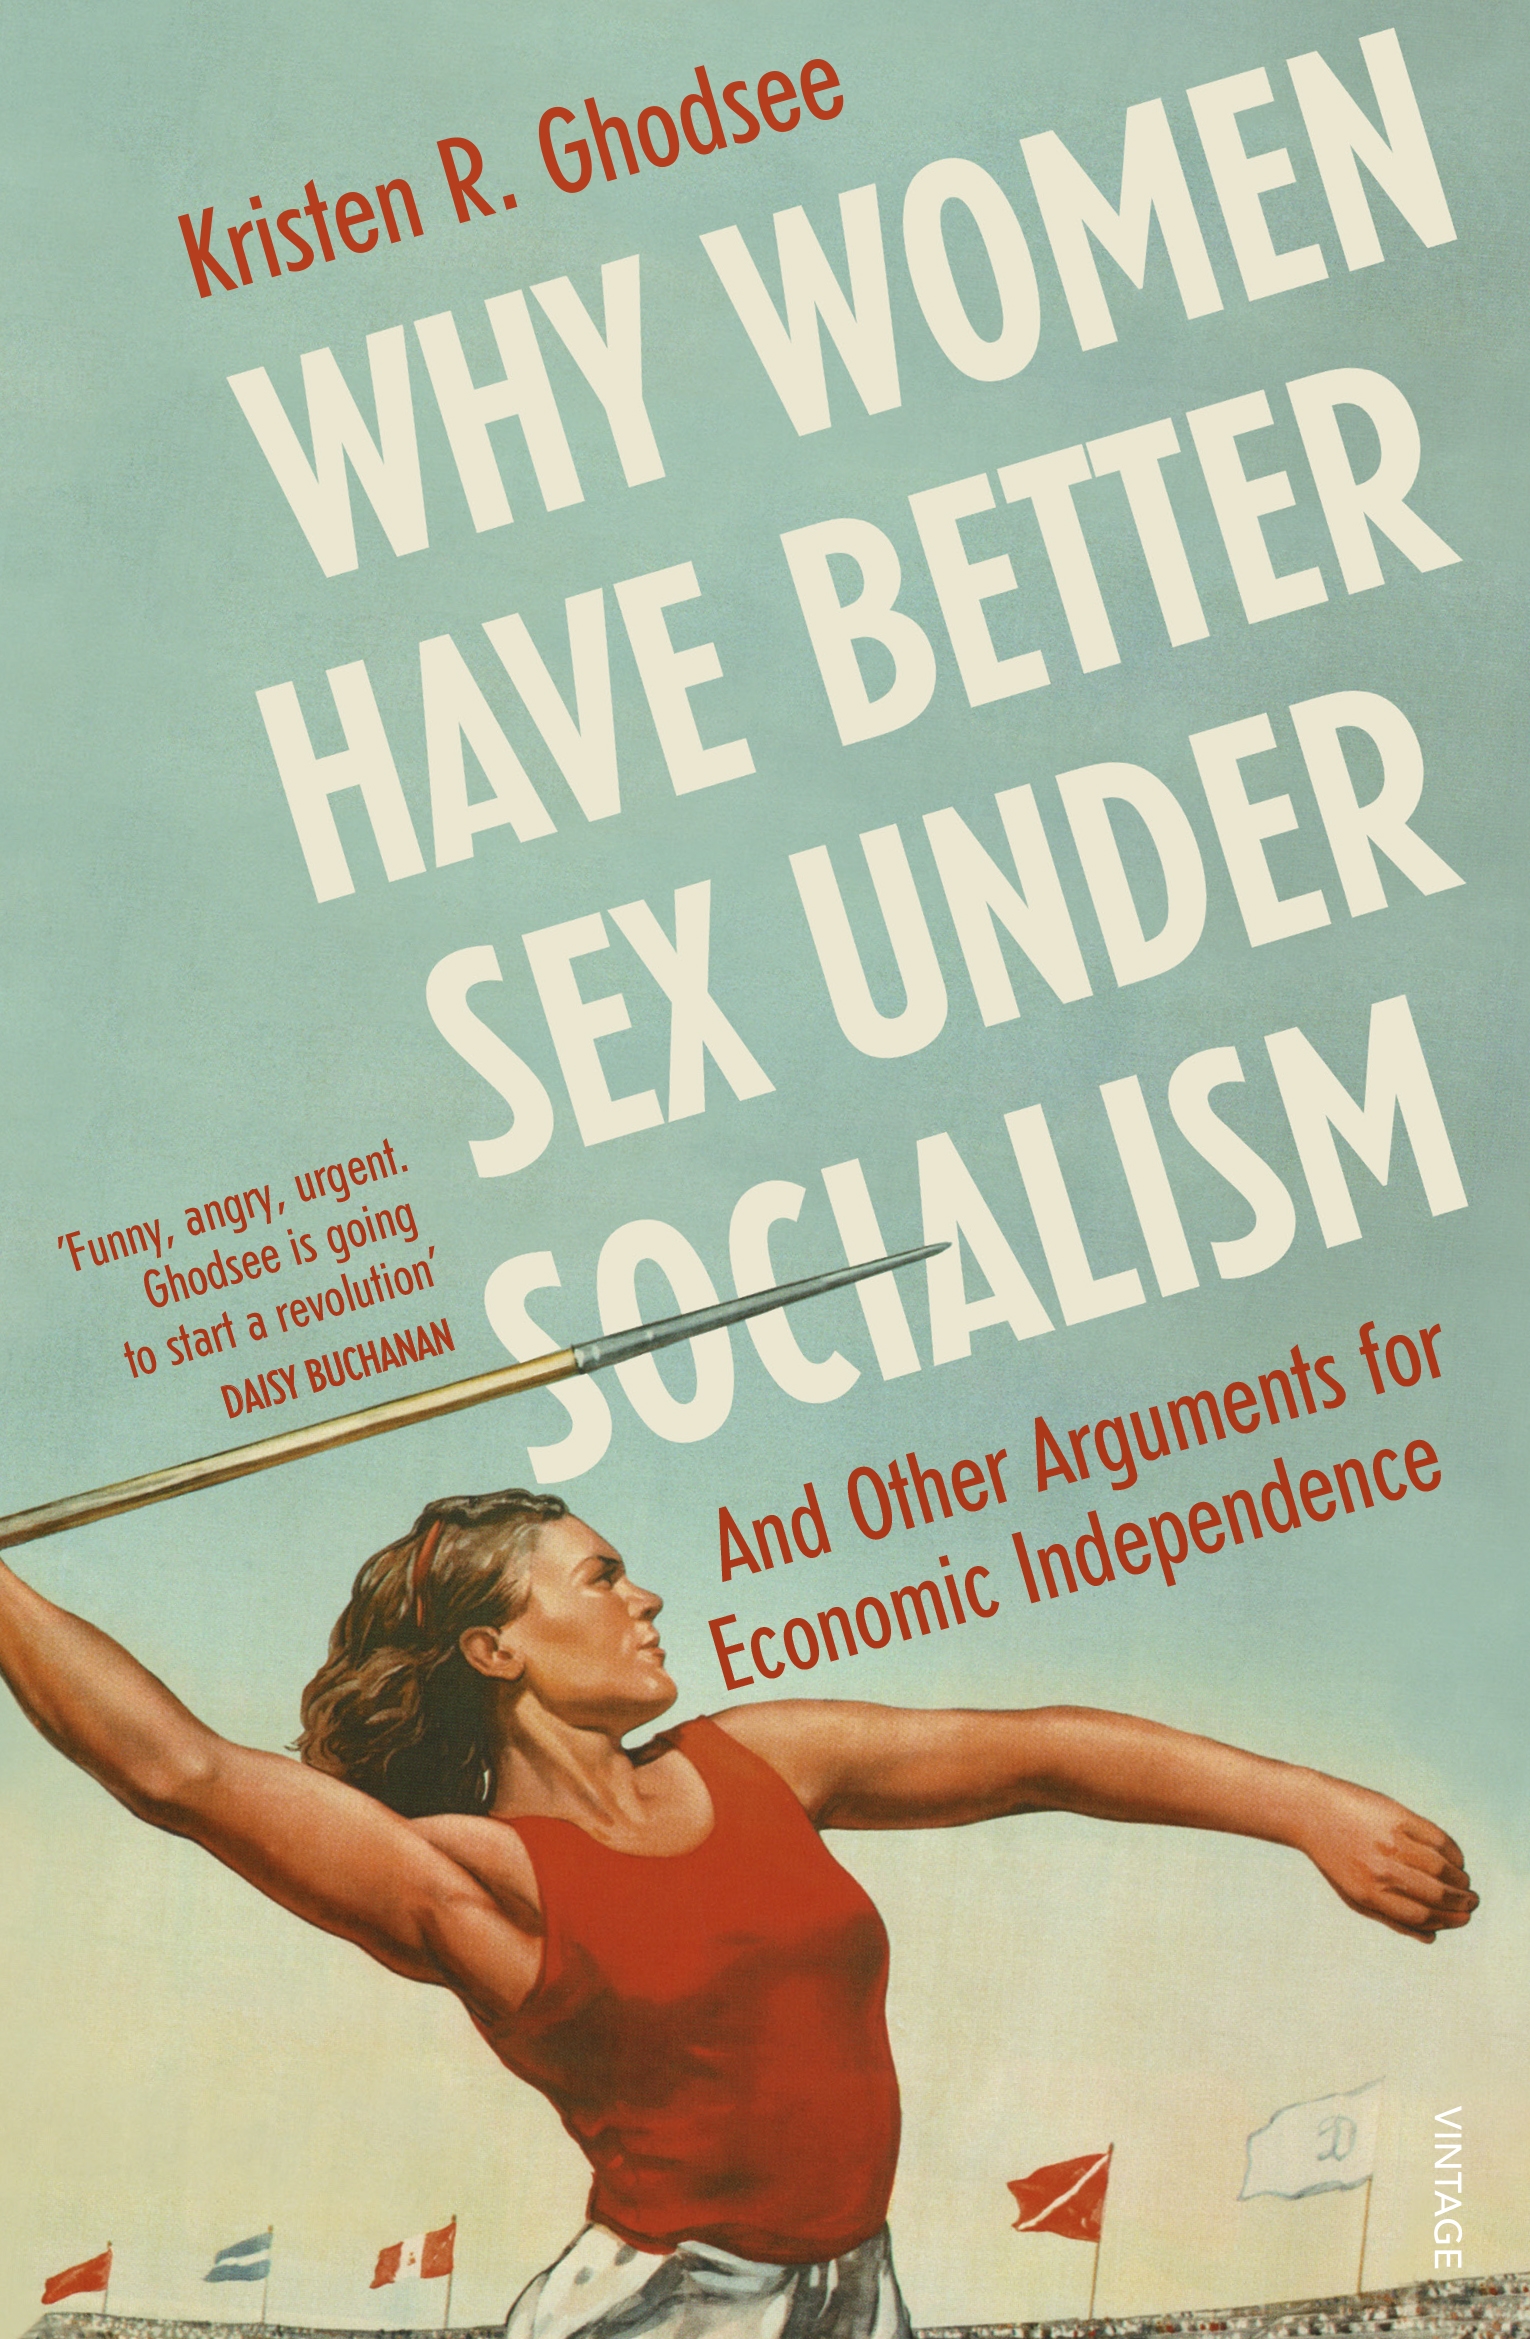 Why Women Have Better Sex Under Socialism By Kristen Ghodsee Penguin